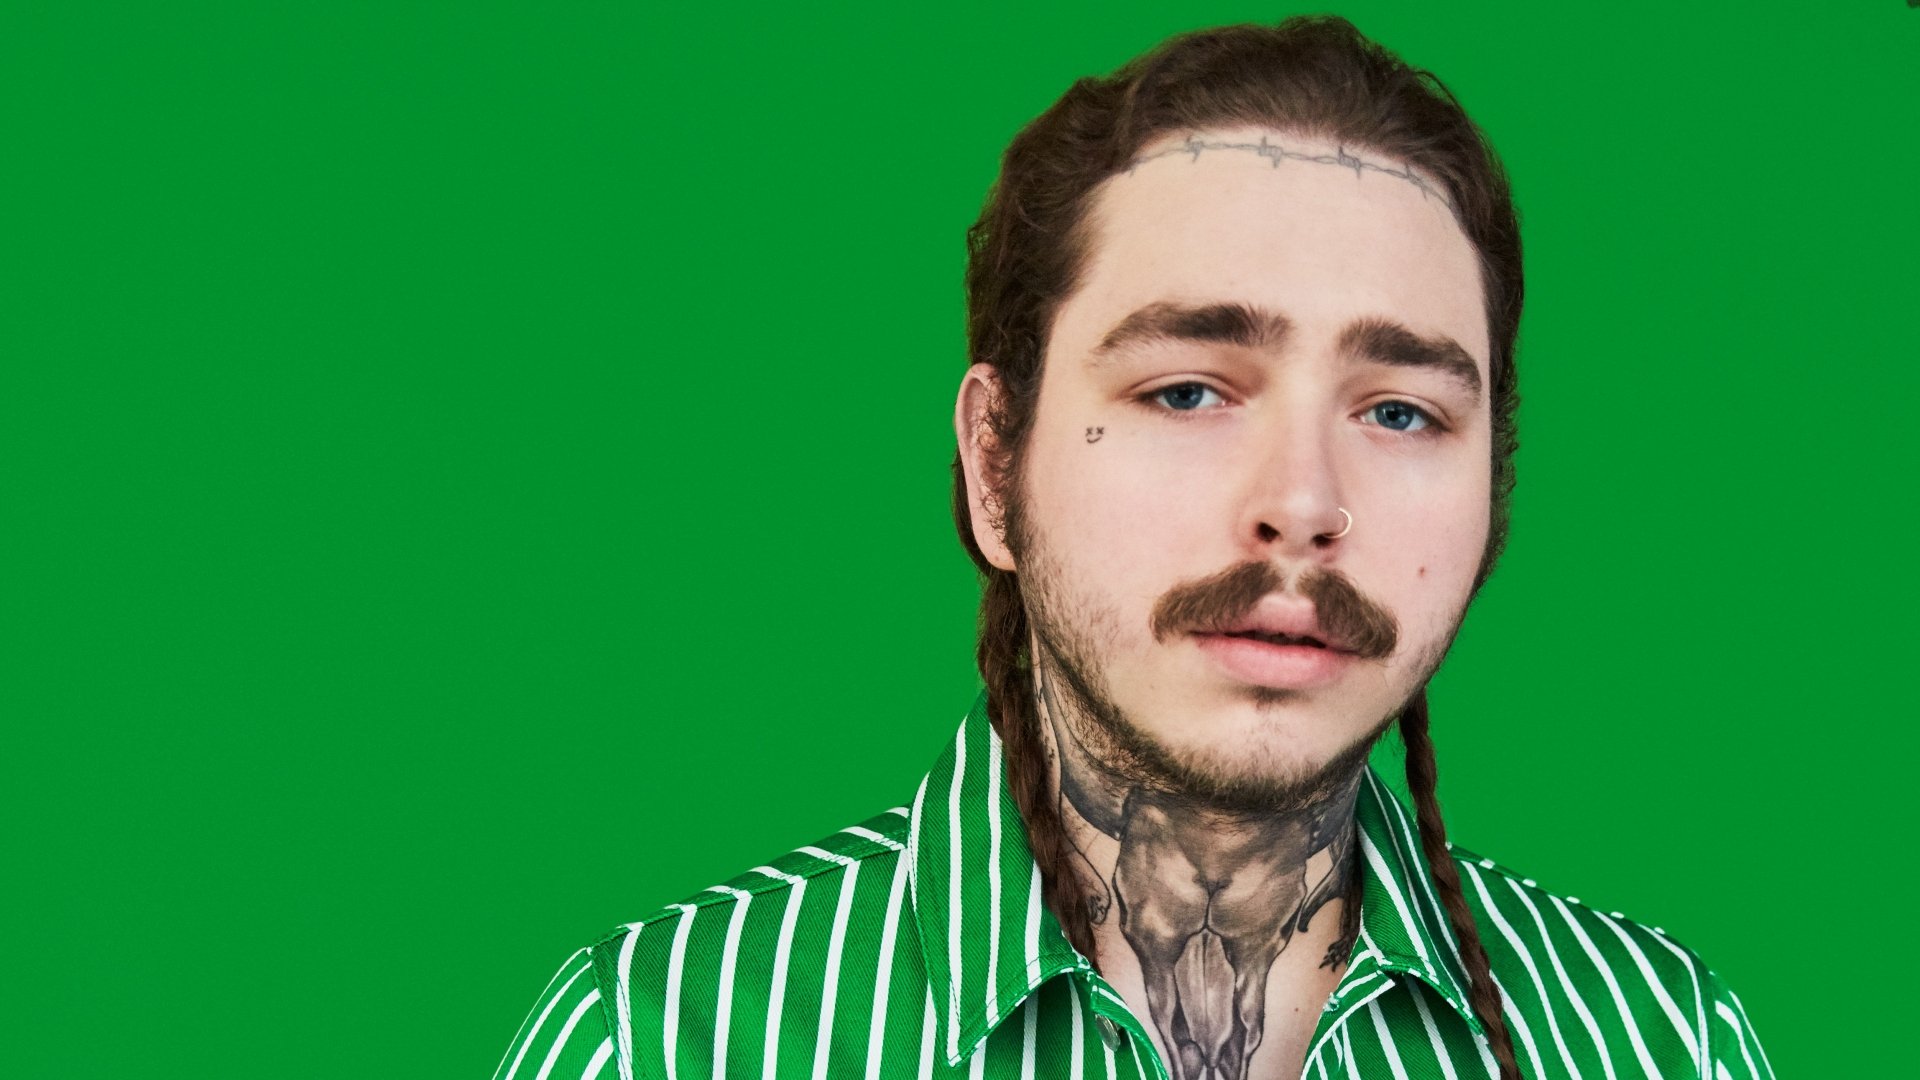 HD wallpaper featuring a man with tattoos and a green-striped shirt against a green background.